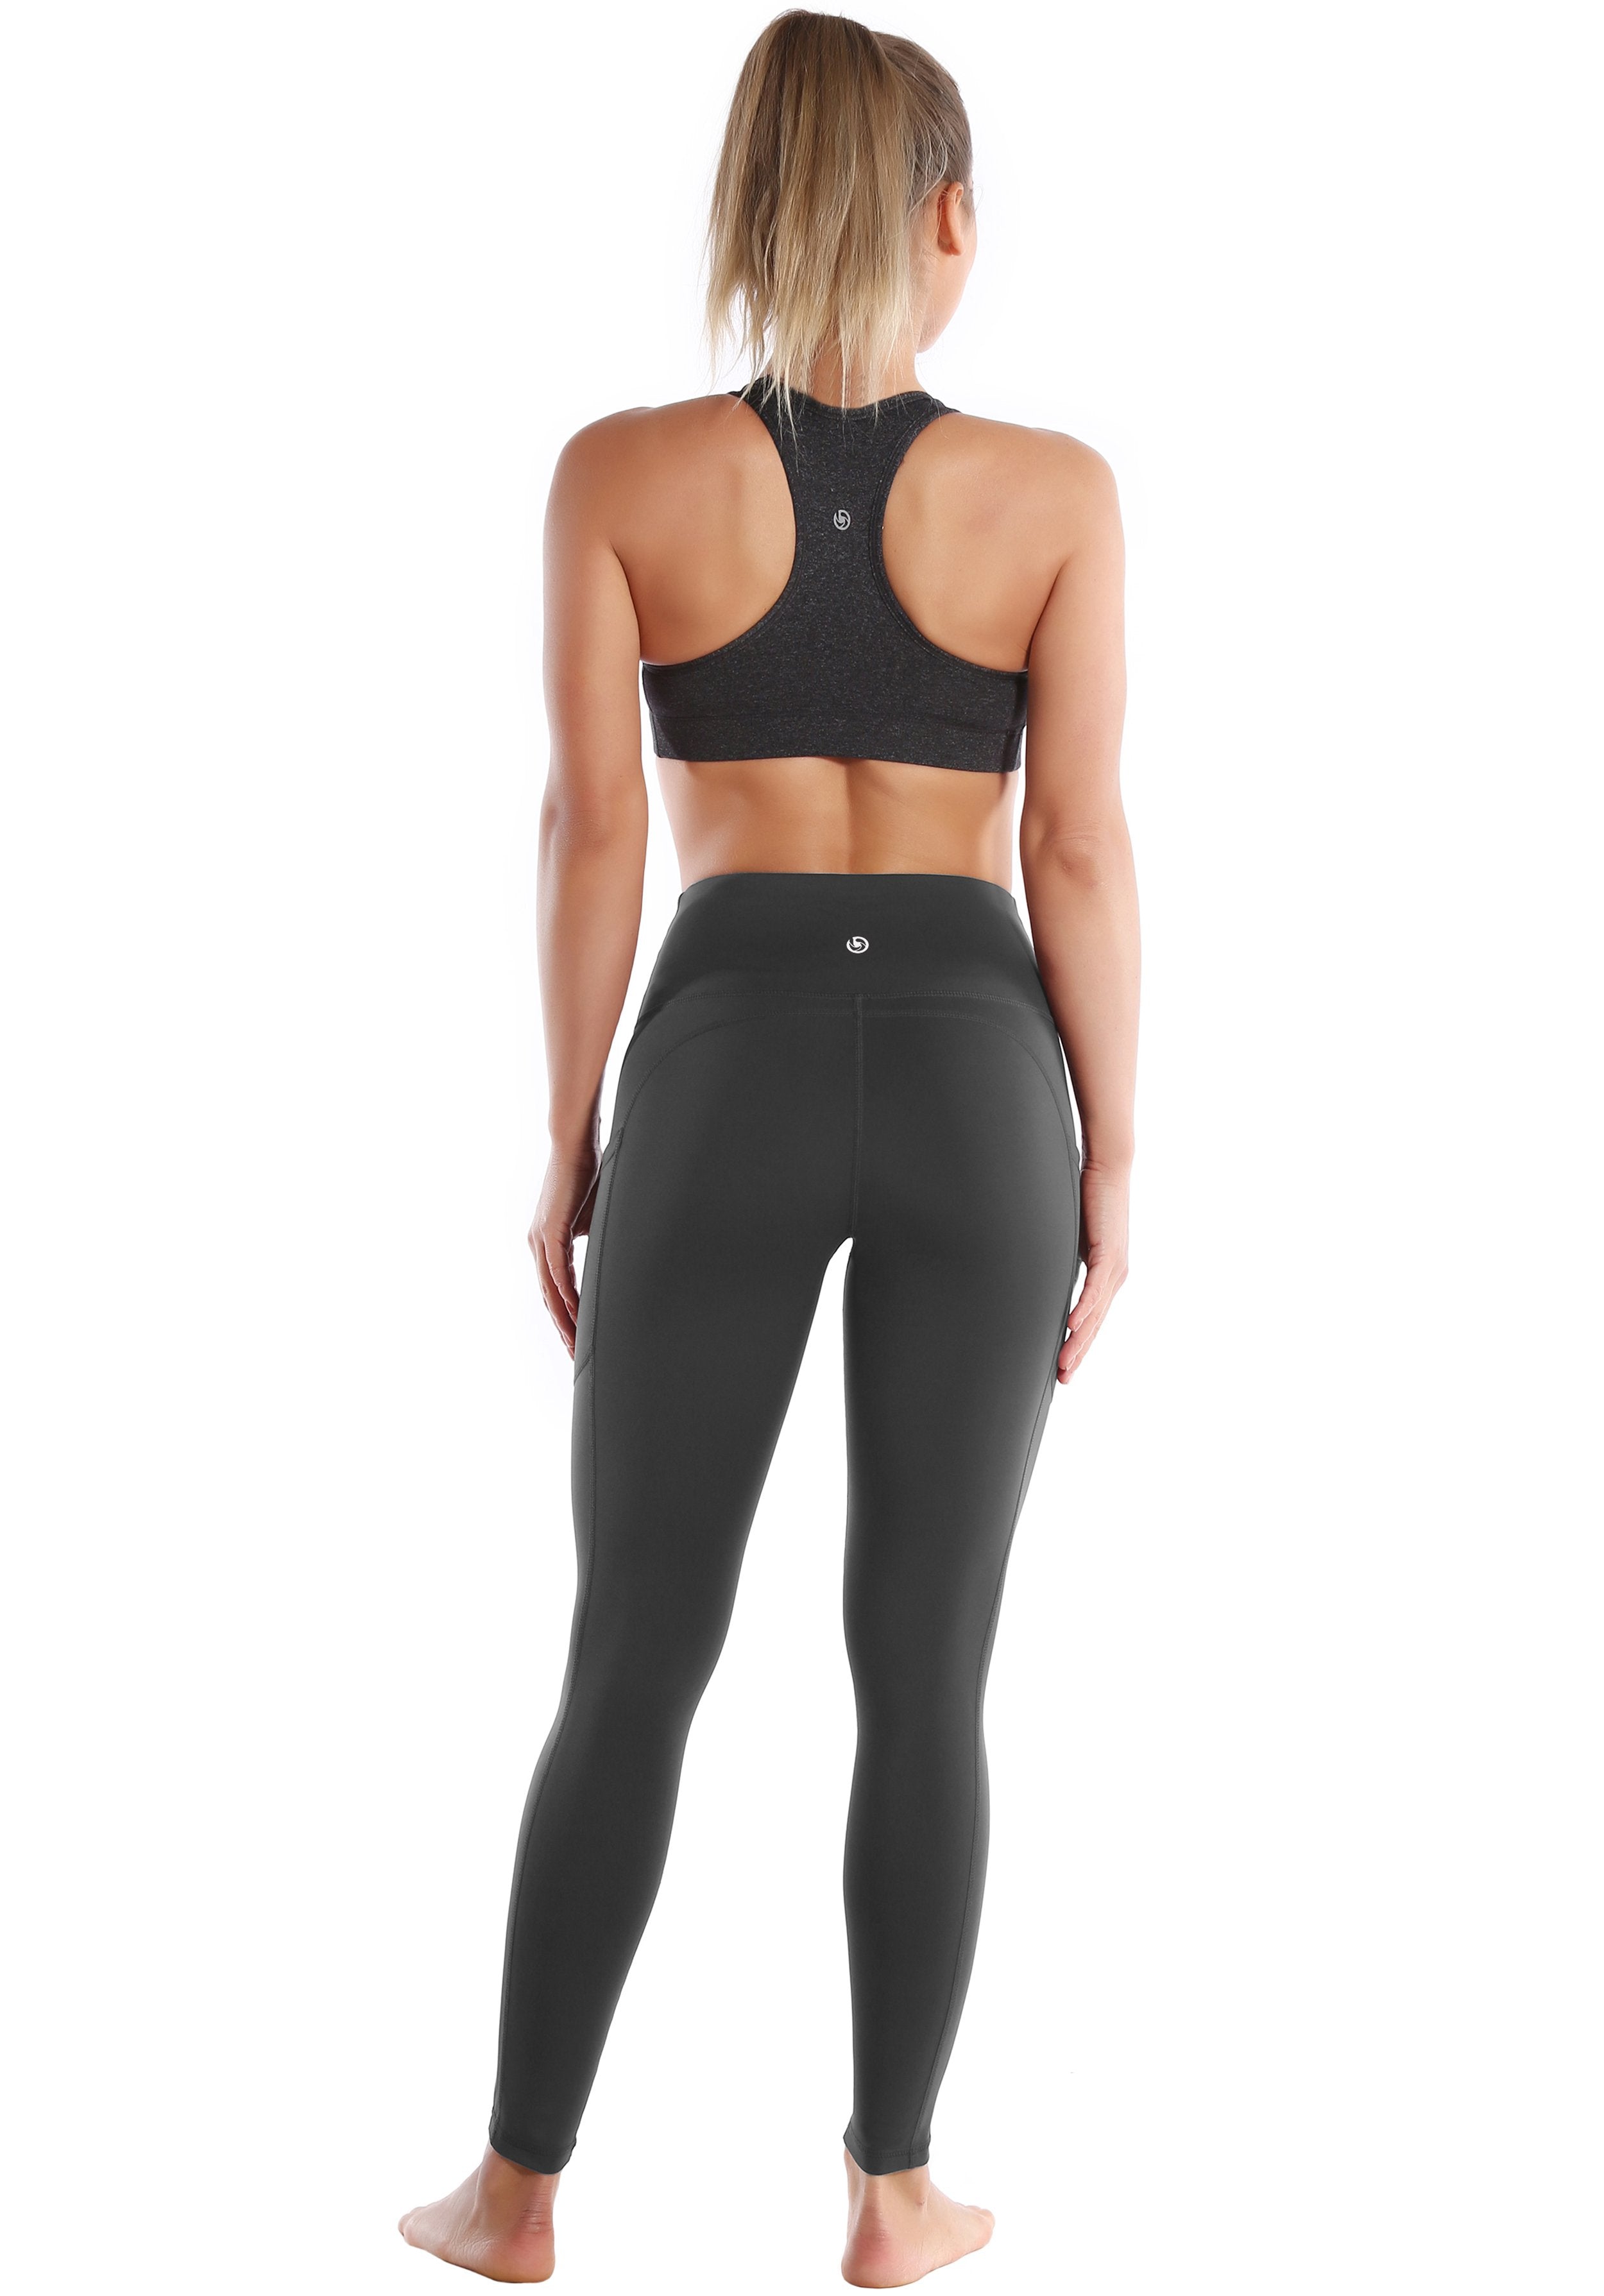 Hip Line Side Pockets Biking Pants shadowcharcoal Sexy Hip Line Side Pockets 75%Nylon/25%Spandex Fabric doesn't attract lint easily 4-way stretch No see-through Moisture-wicking Tummy control Inner pocket Two lengths